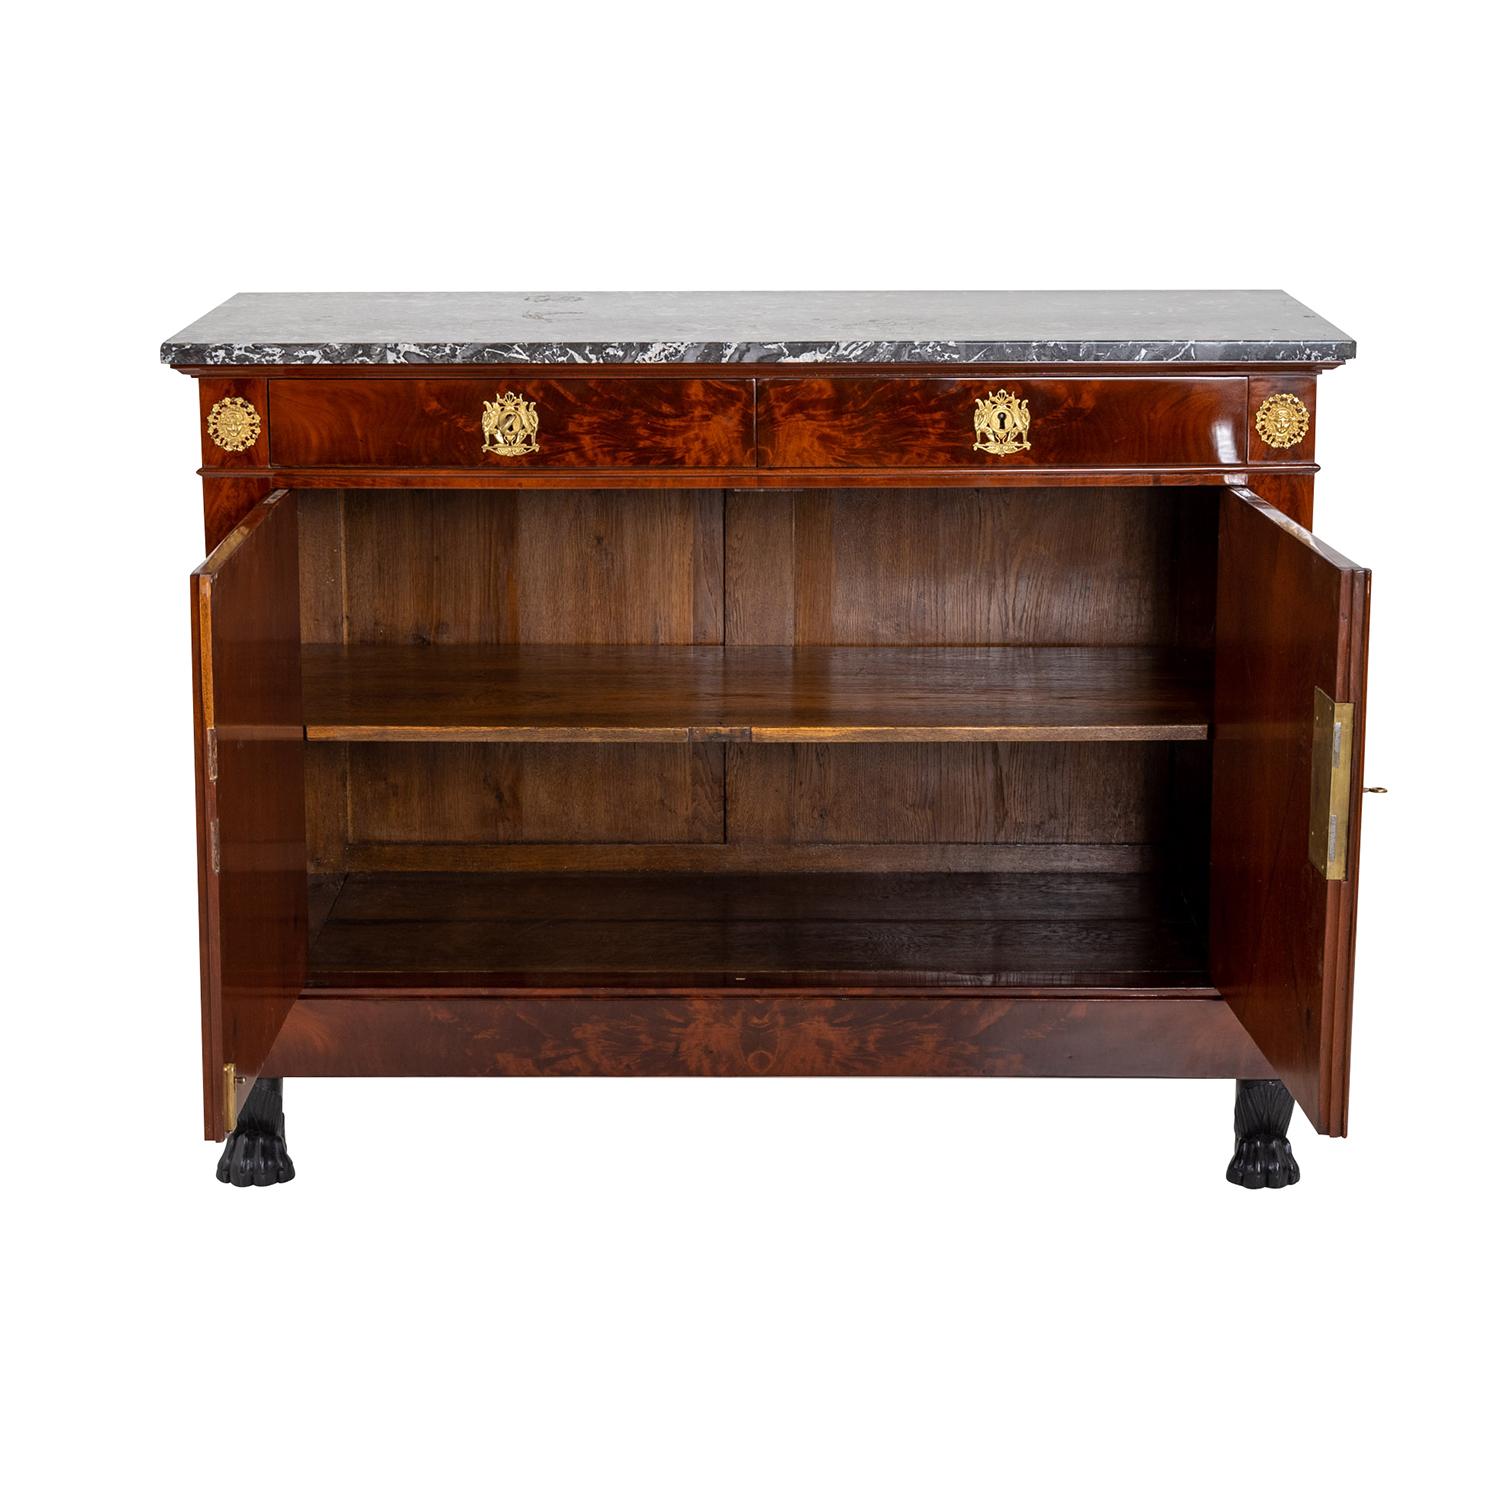 Polished 19th Century French Empire Antique Mahogany, Marble Chest of Drawers For Sale